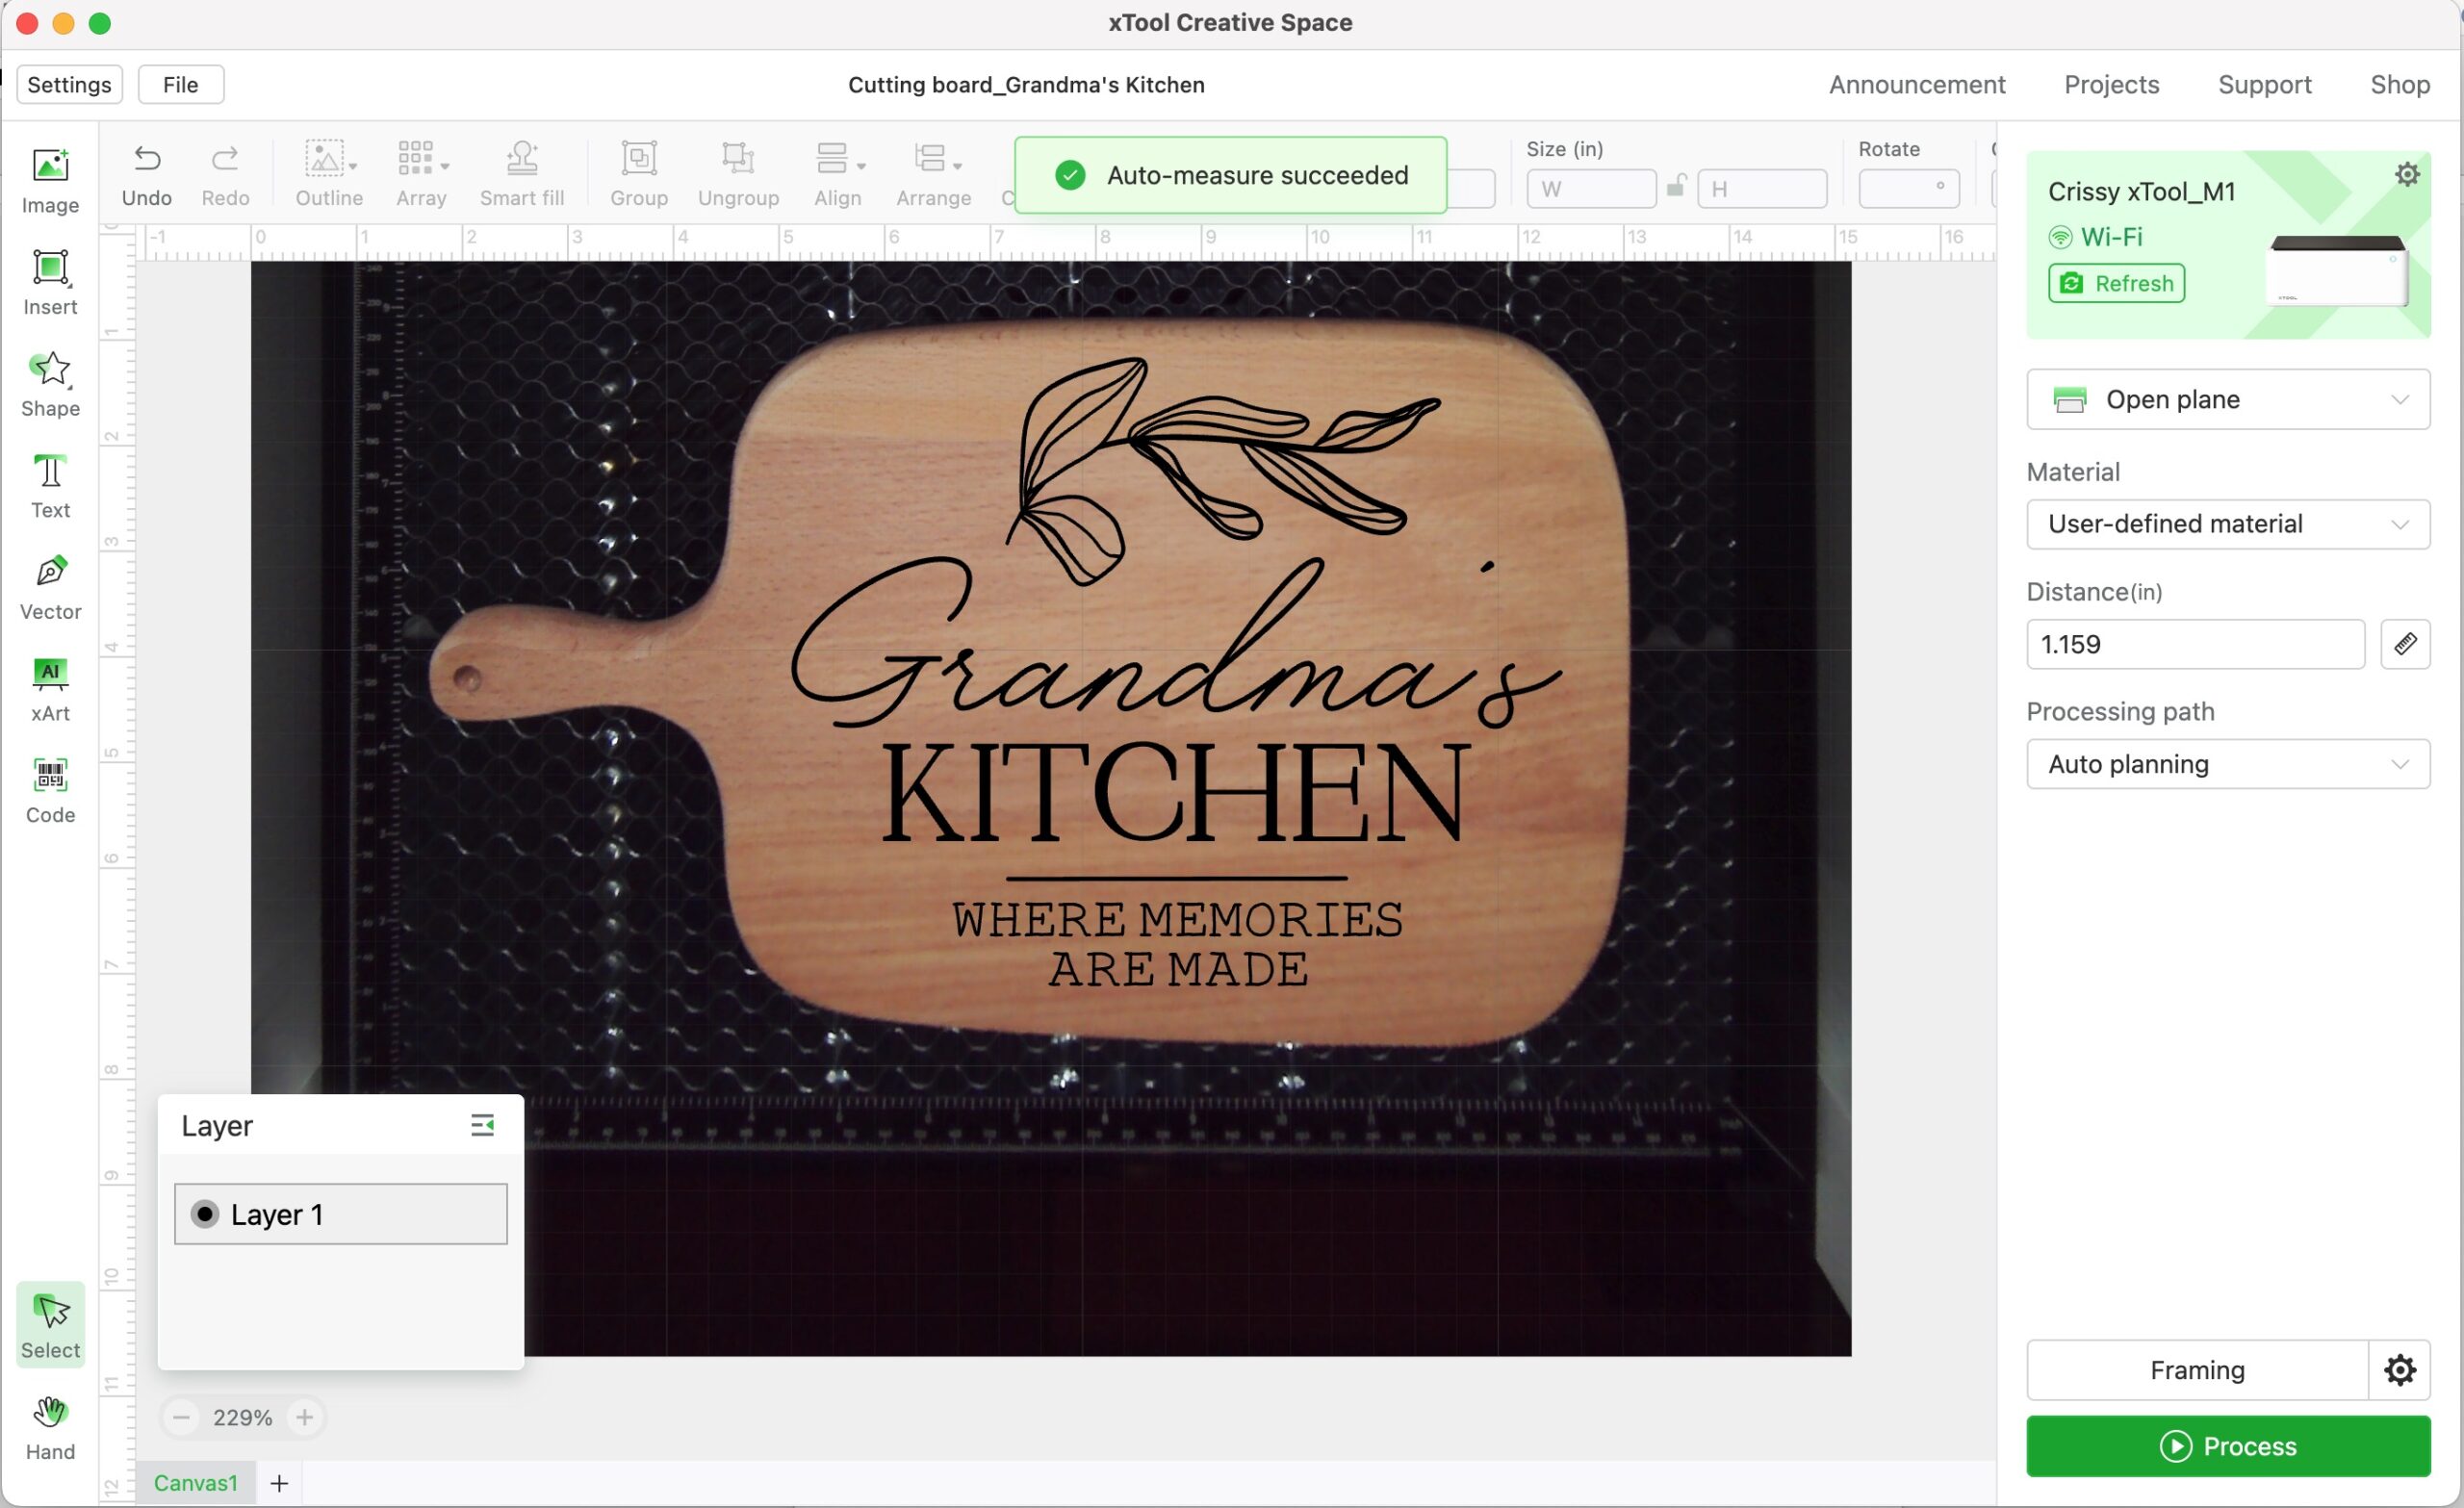 Screenshot of selecting Open Plane and auto-measure in xTool Creative Space showing how to make an engraved cutting board that reads "Grandma's Kitchen".